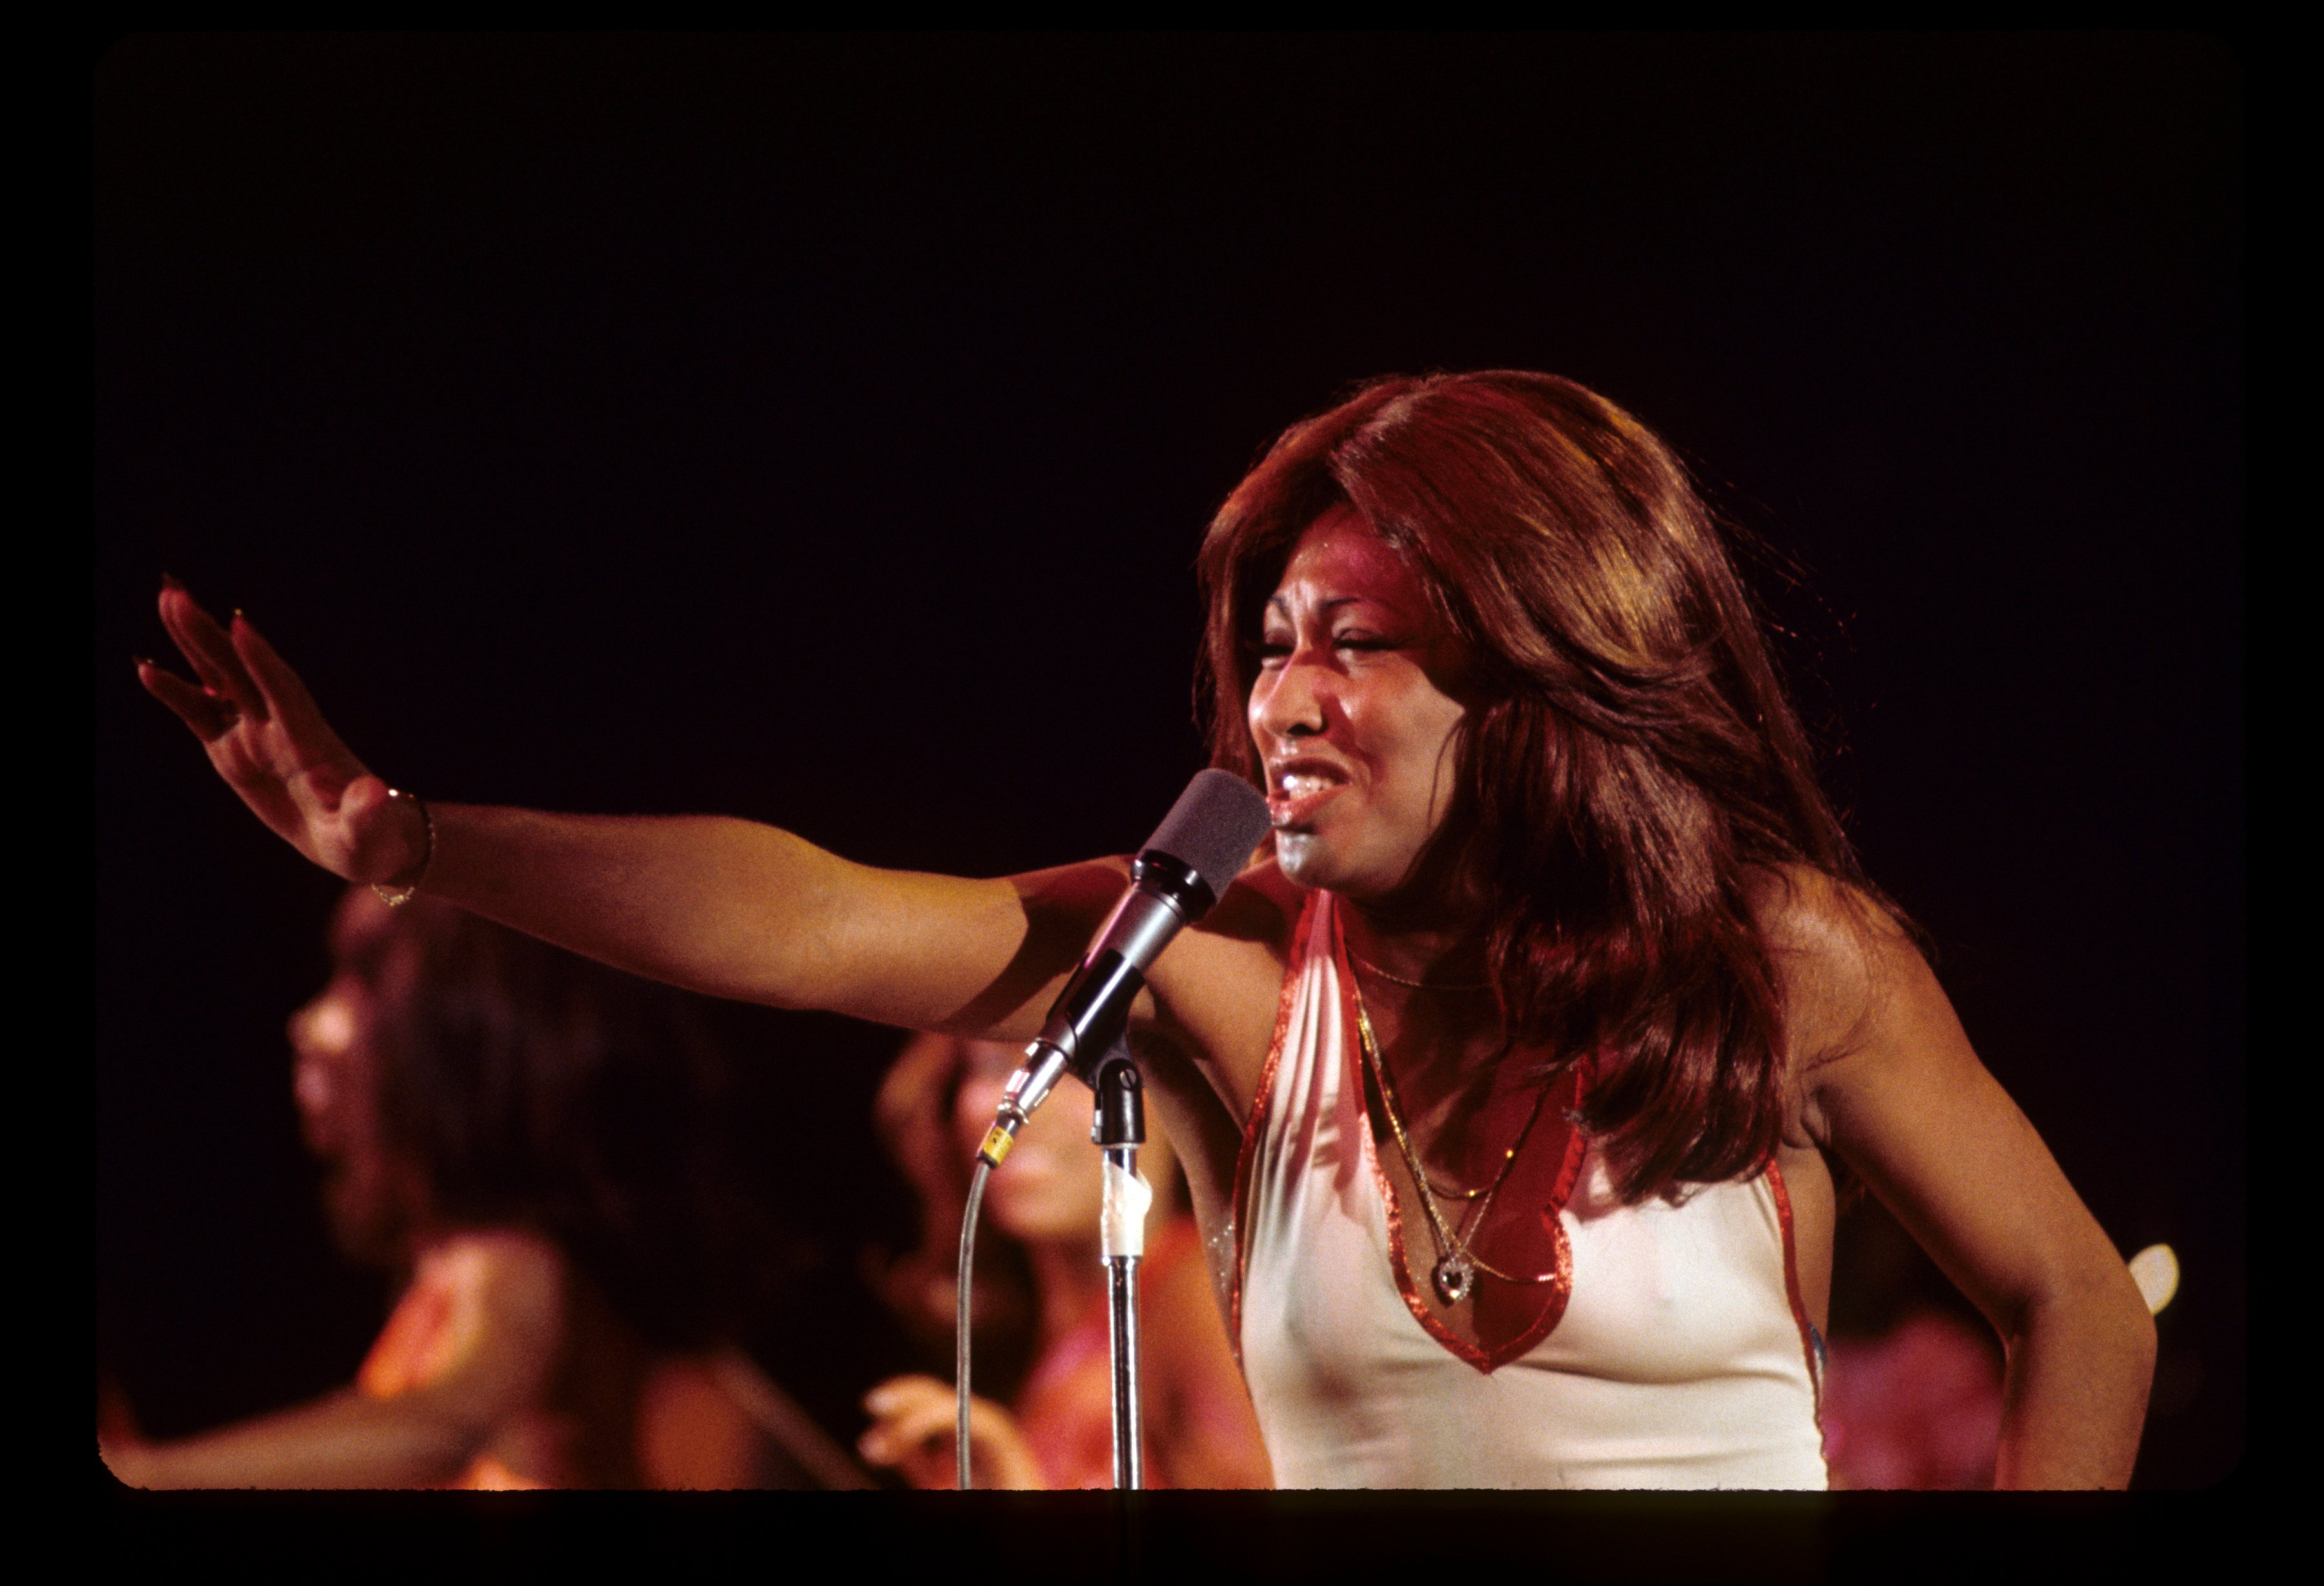 Tina Turner extends her hand while singing on stage